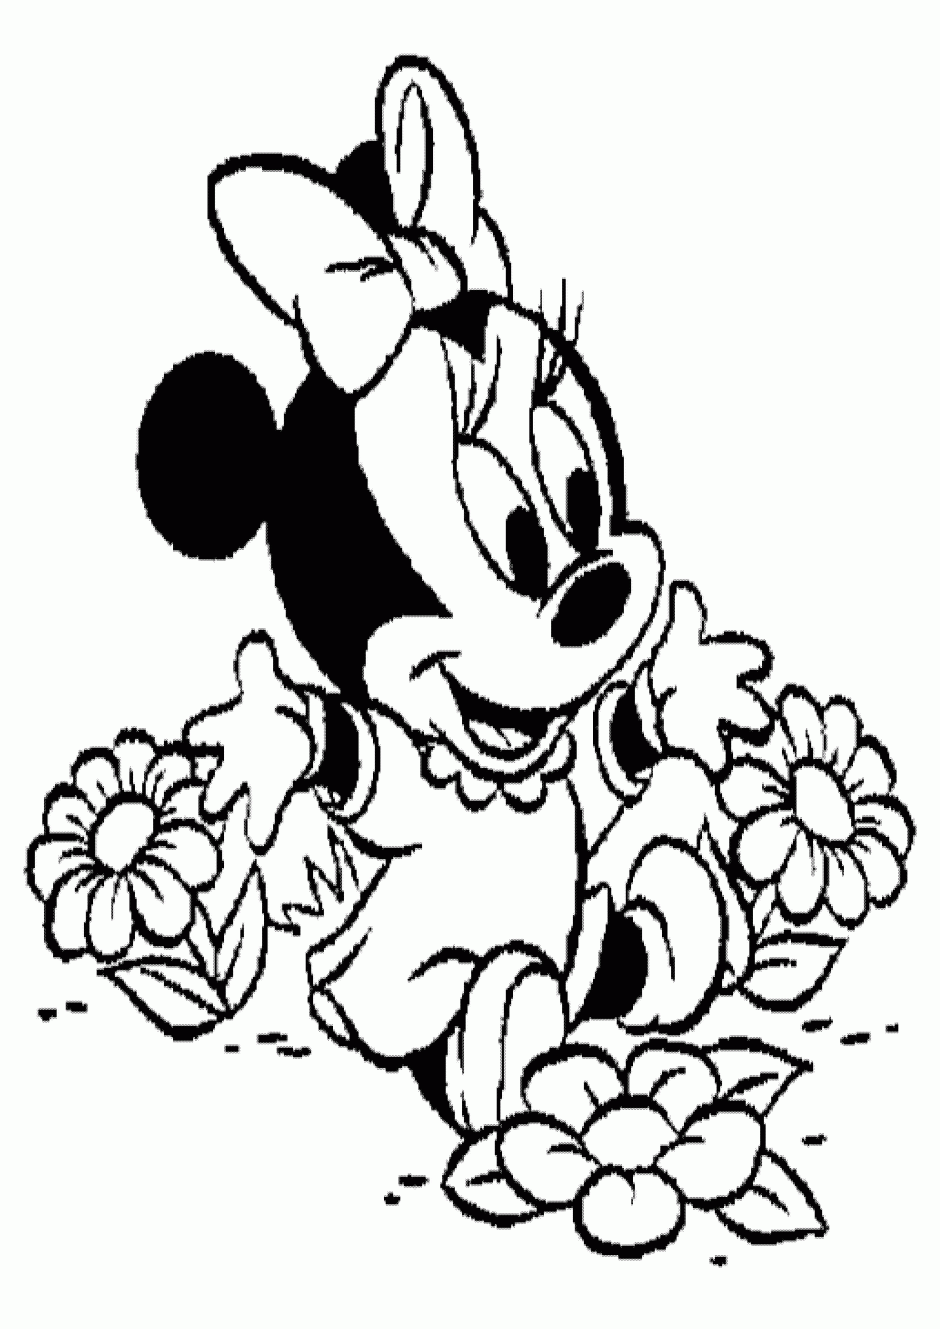 Mickey mouse  black and white minnie mouse clipart black and white clipartfox